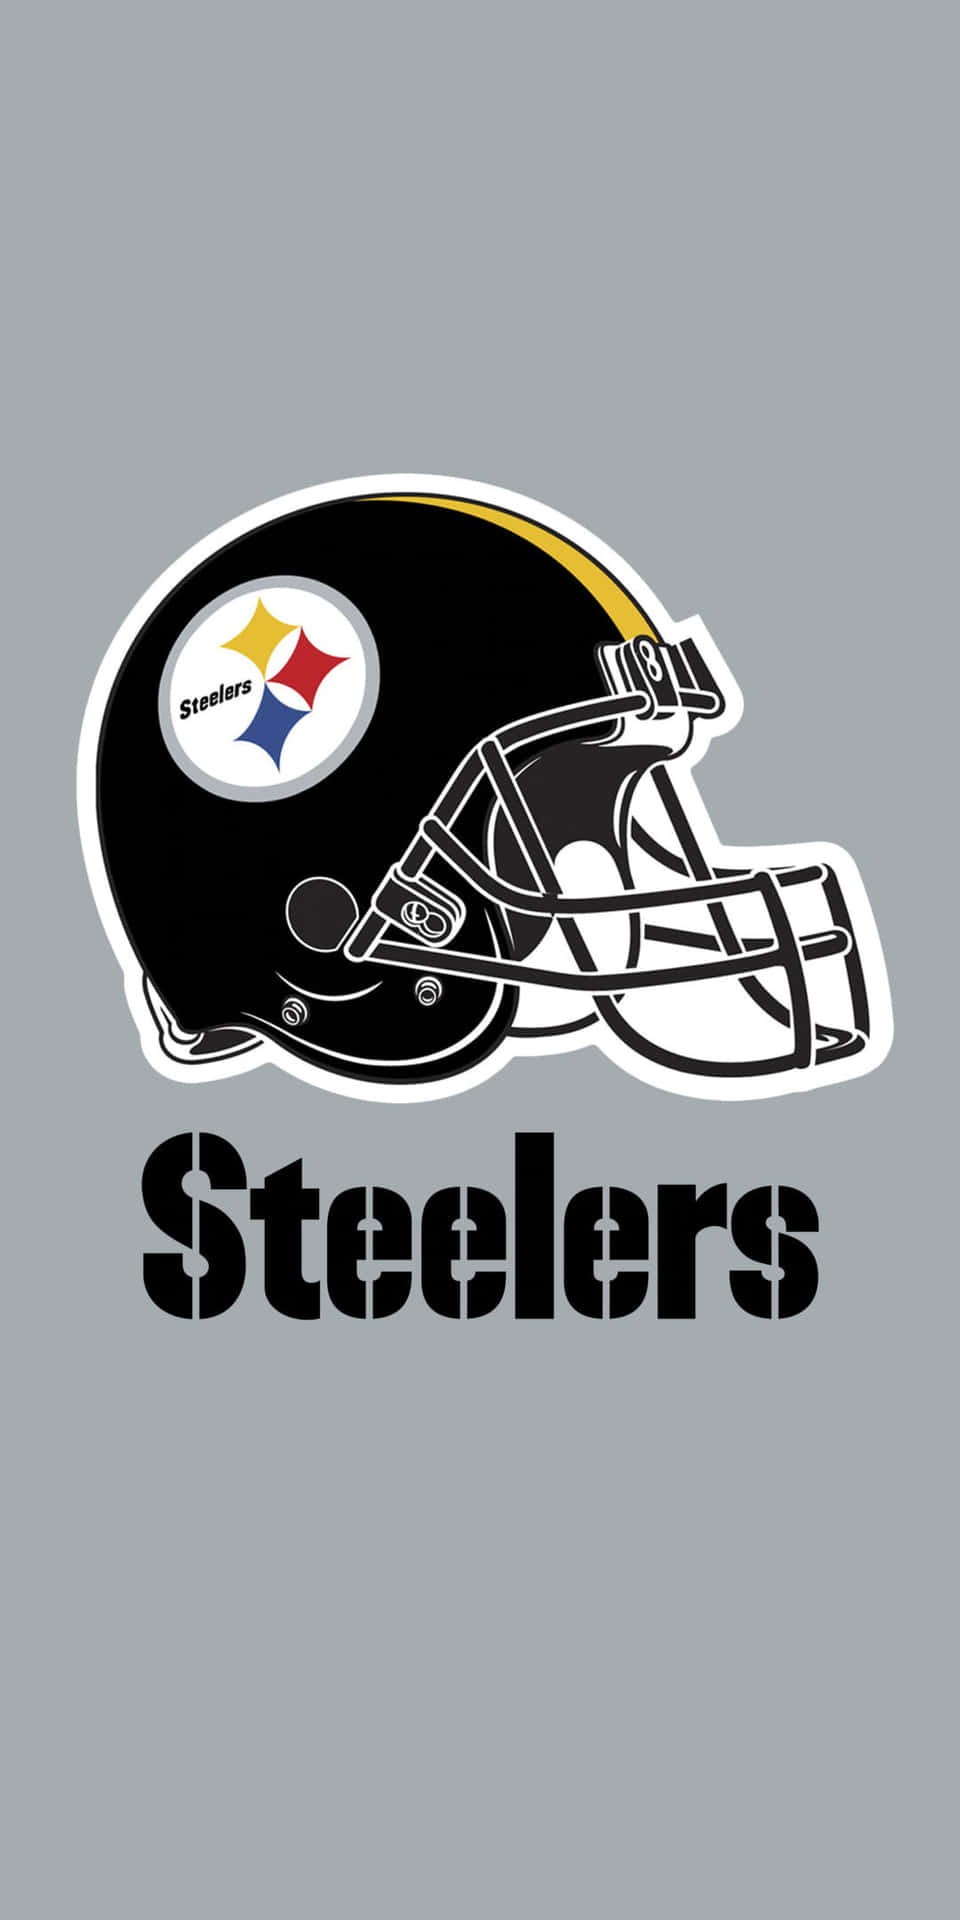 Get Ready For The Game With Your Favorite Steelers Phone